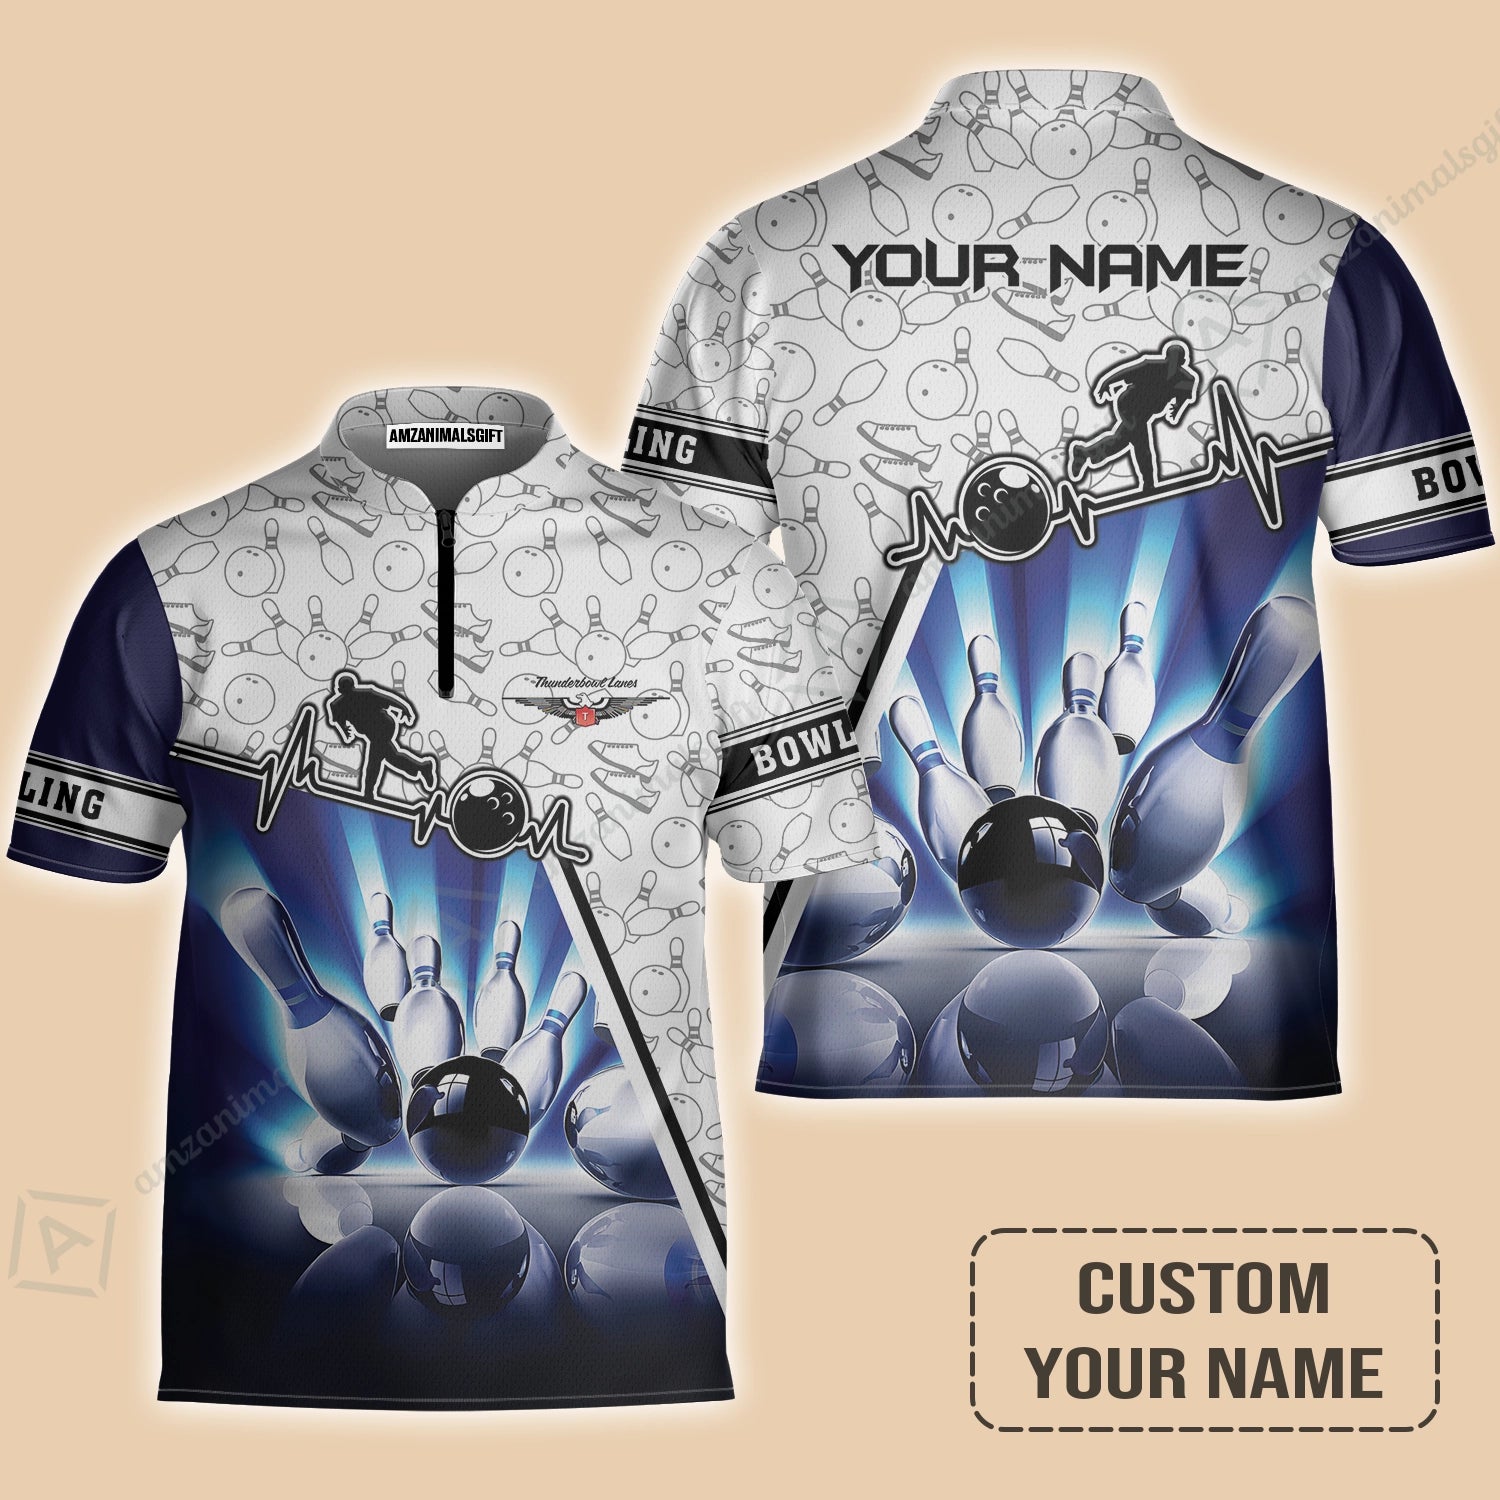 Personalized Name Bowling Jersey, Thunderbowl Lanes Unique Bowling Apparel For Men Women, Perfect Gift For Bowling Lovers, Bowlers